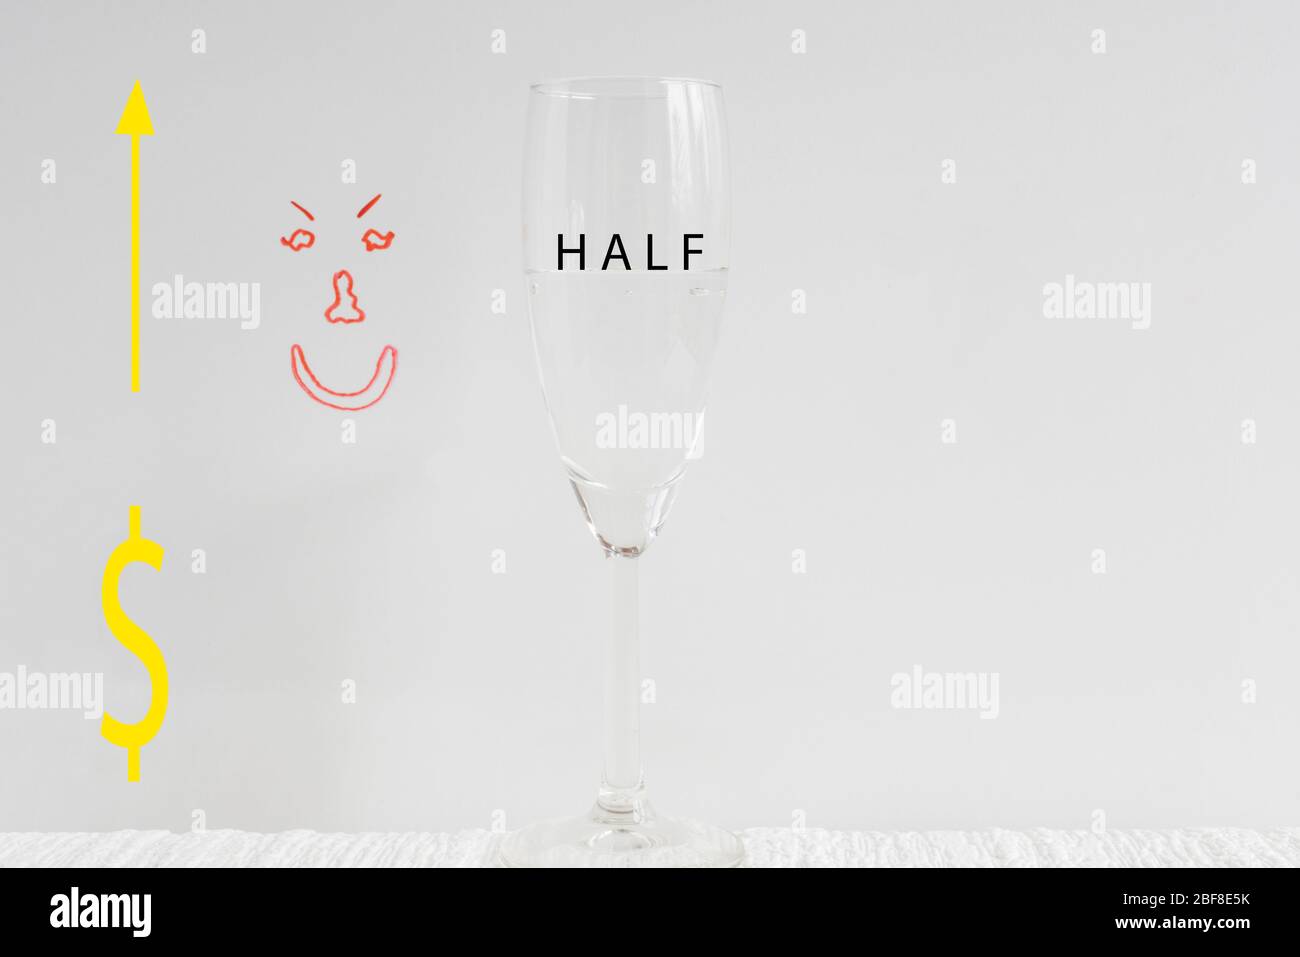 One wine glass, half full with drawn  happy face in background depicting concept of glass half full. Stock Photo